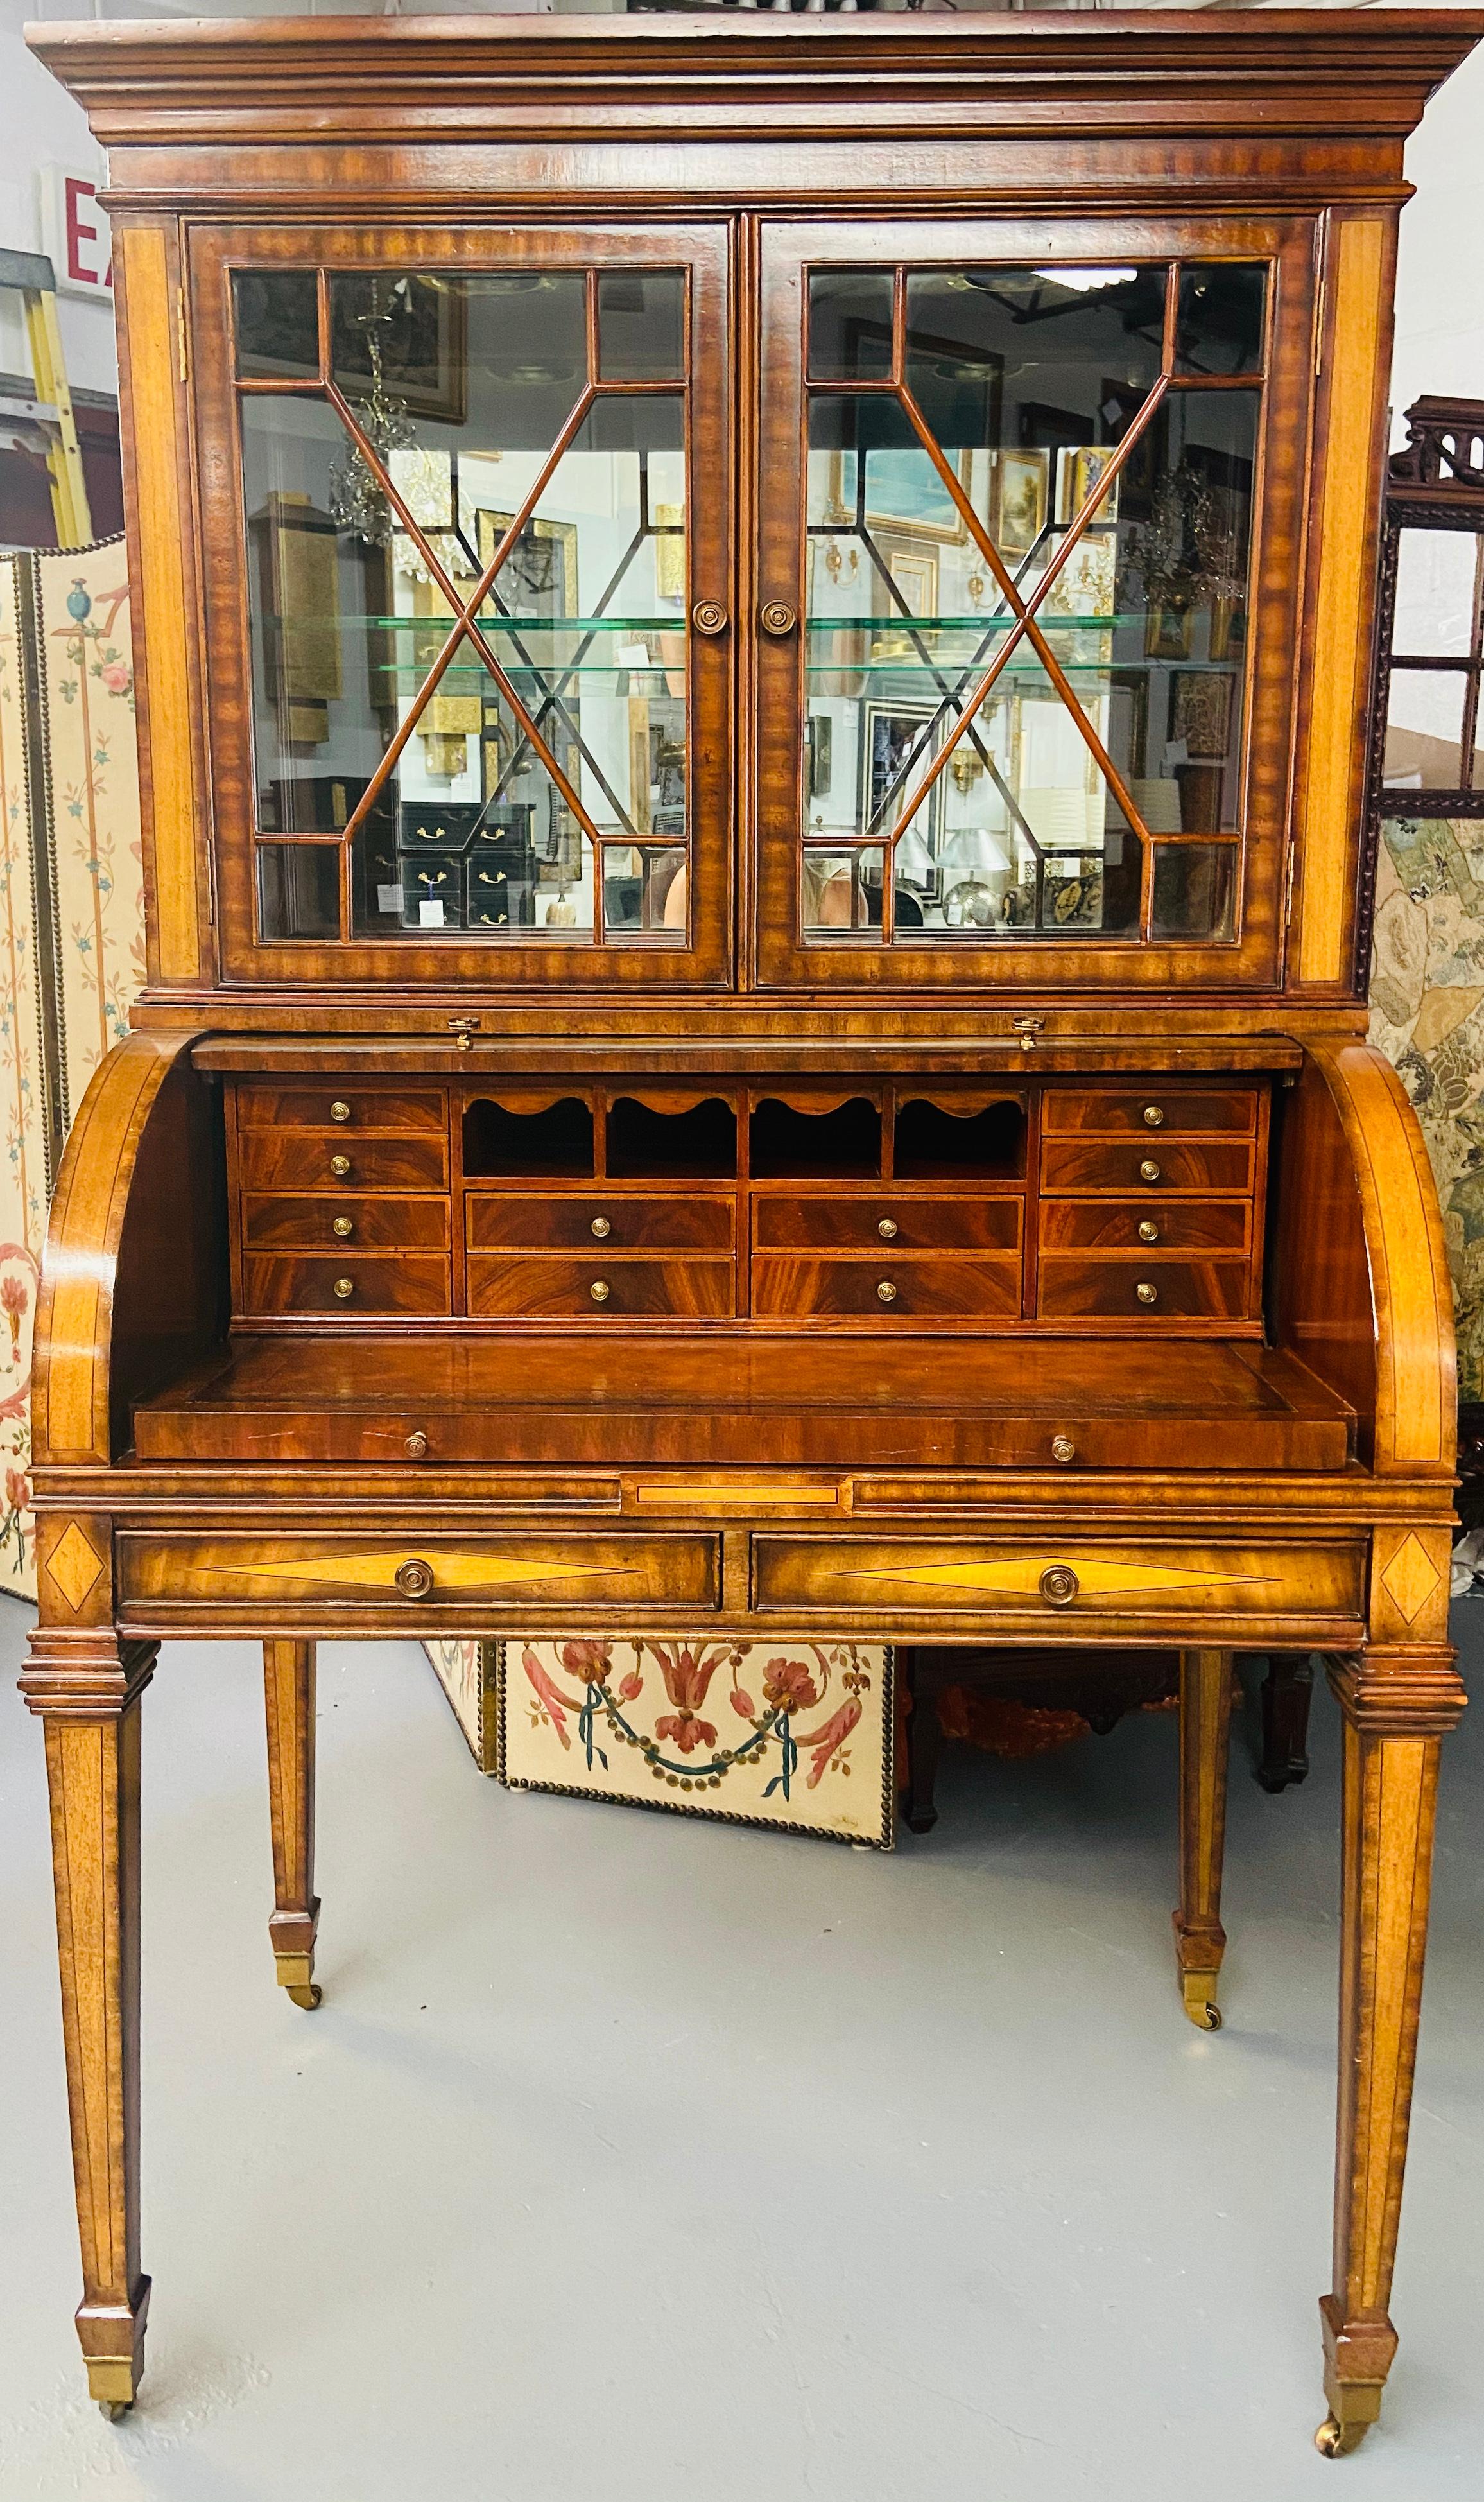 This stunning Regency style Maitland Smith flame mahogany secretary desk has two parts. The upper part is a two sectional glass door cabinet with one glass shelf and two adjustable inside lights. The bottom part features a slant lid covering